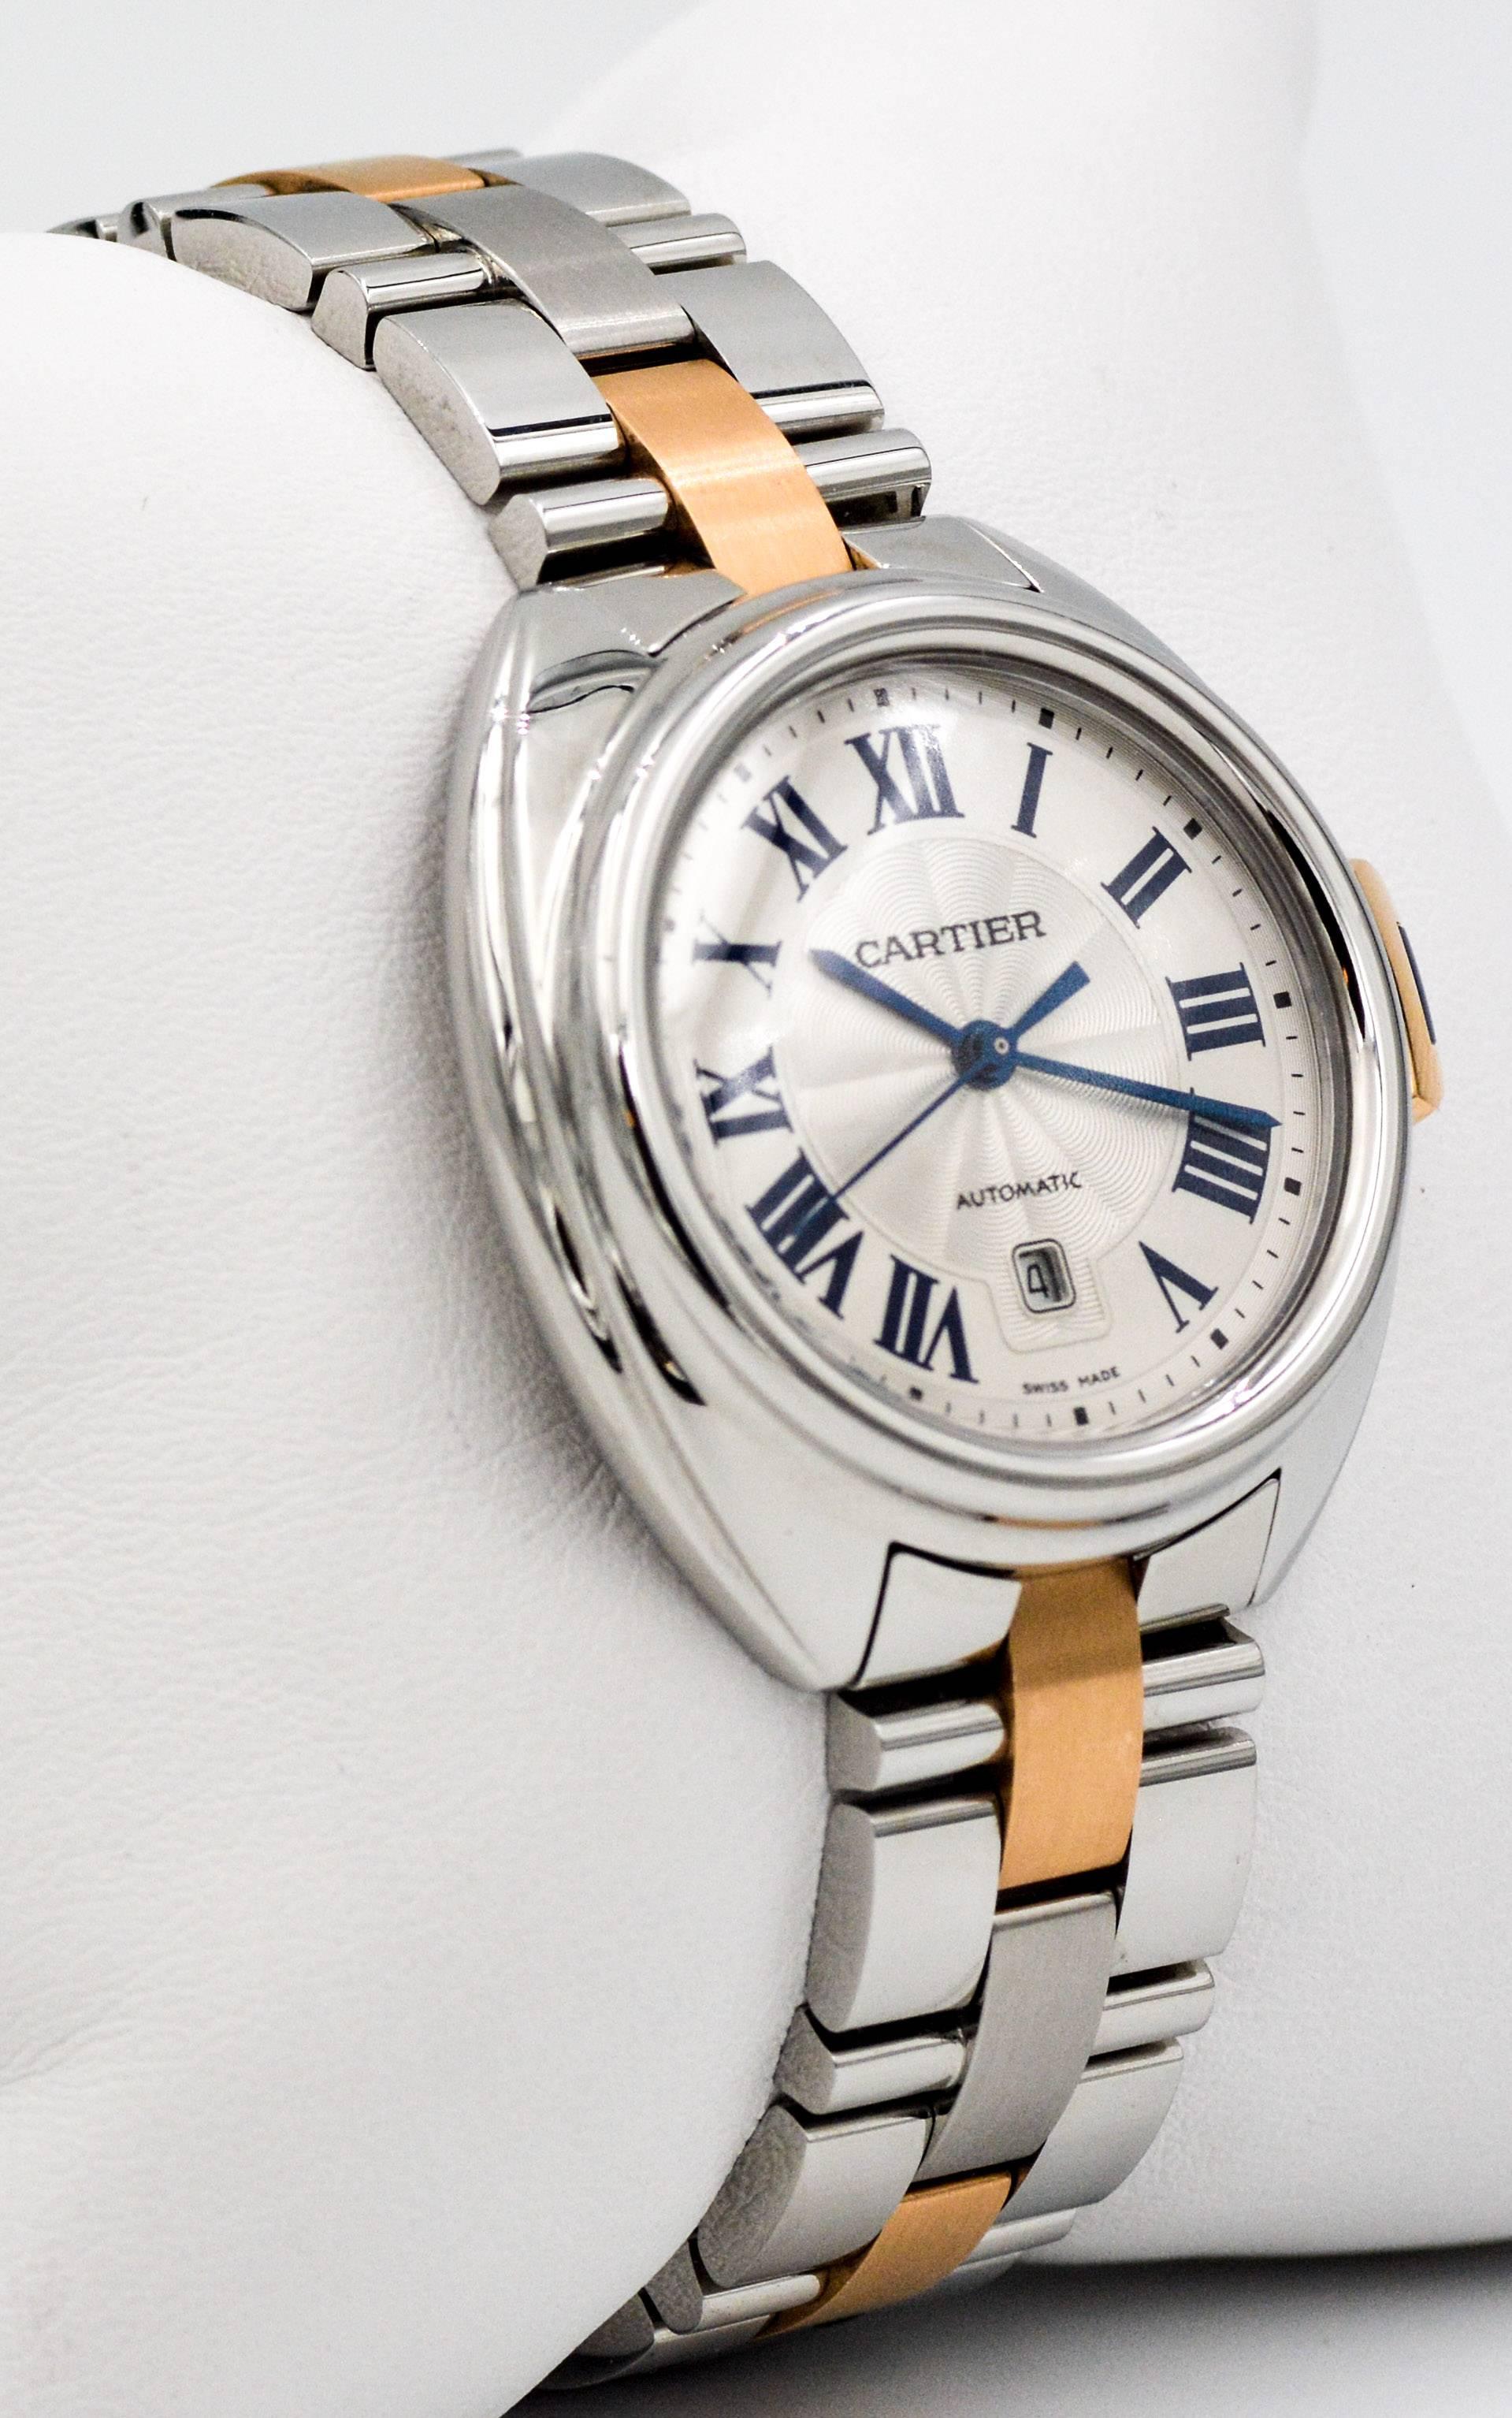 Cle de Cartier is a watch for women exuding soft curves, clean lines and a rounded profile. Cartier exhibits a minimalist elegance in this classic 18kt yellow gold and stainless steel Cle De Cartier 31 mm case, and radiantly textured silvered dial